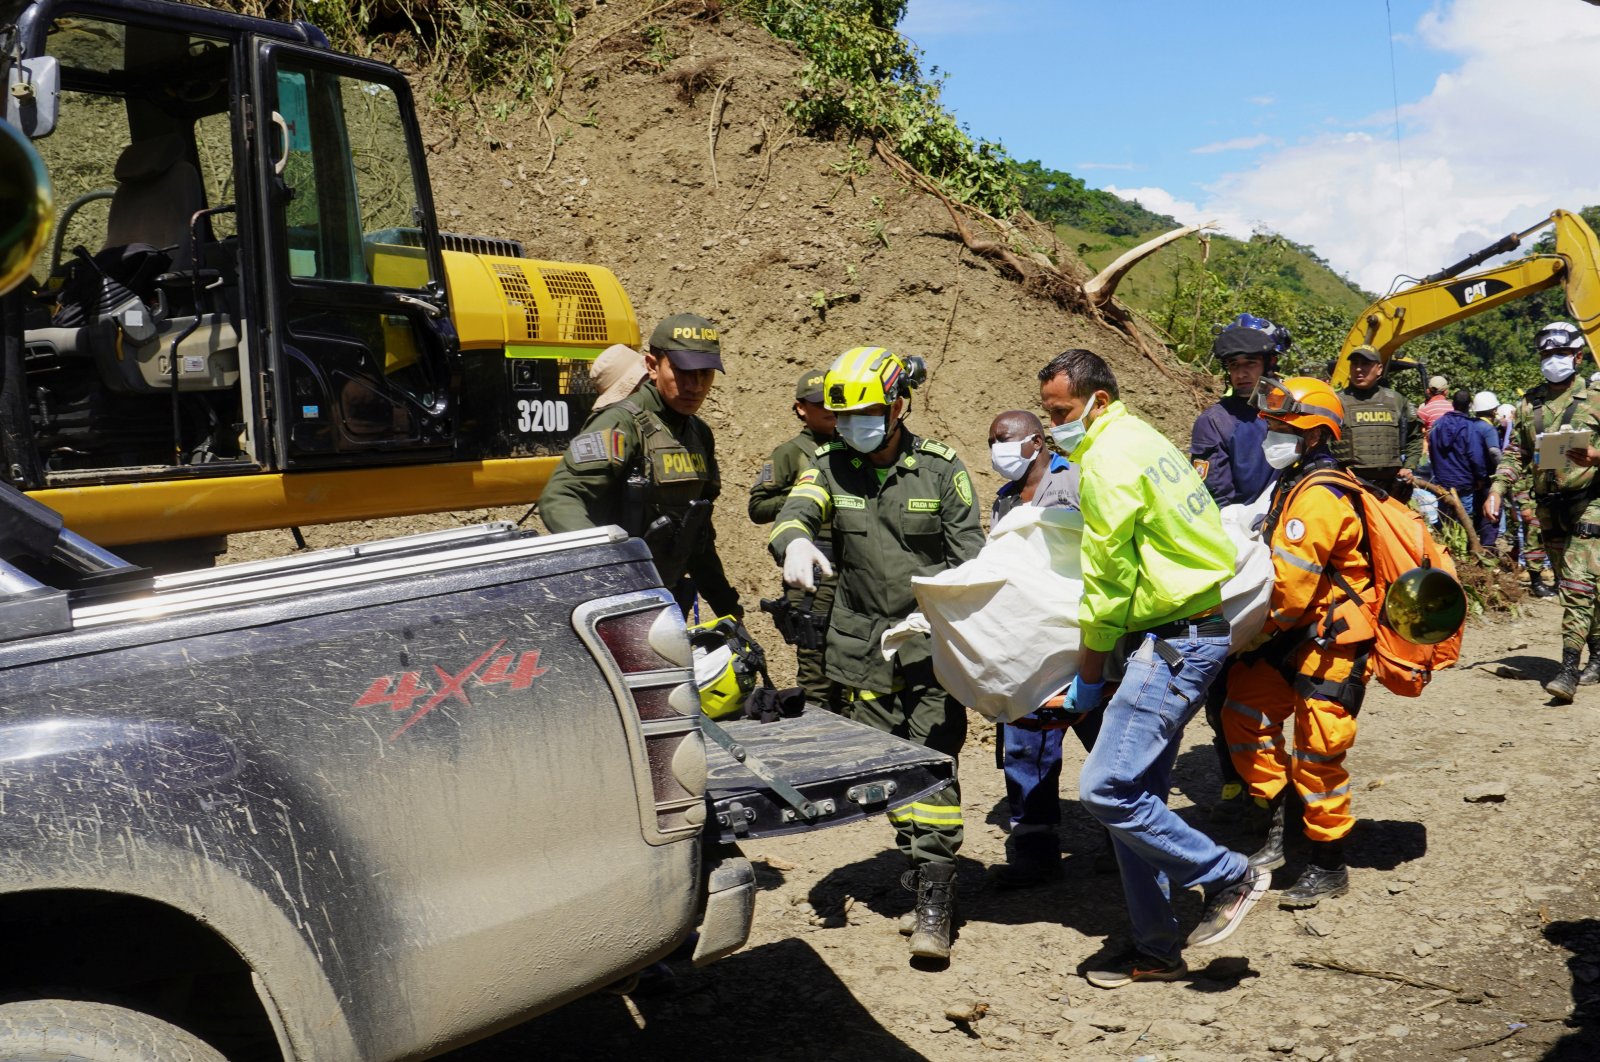 Rescuers carry the body of a deceased person after a bus was buried by a landslide, Pueblo Rico, Colombia, Dec. 5, 2022. (Reuters Photo)